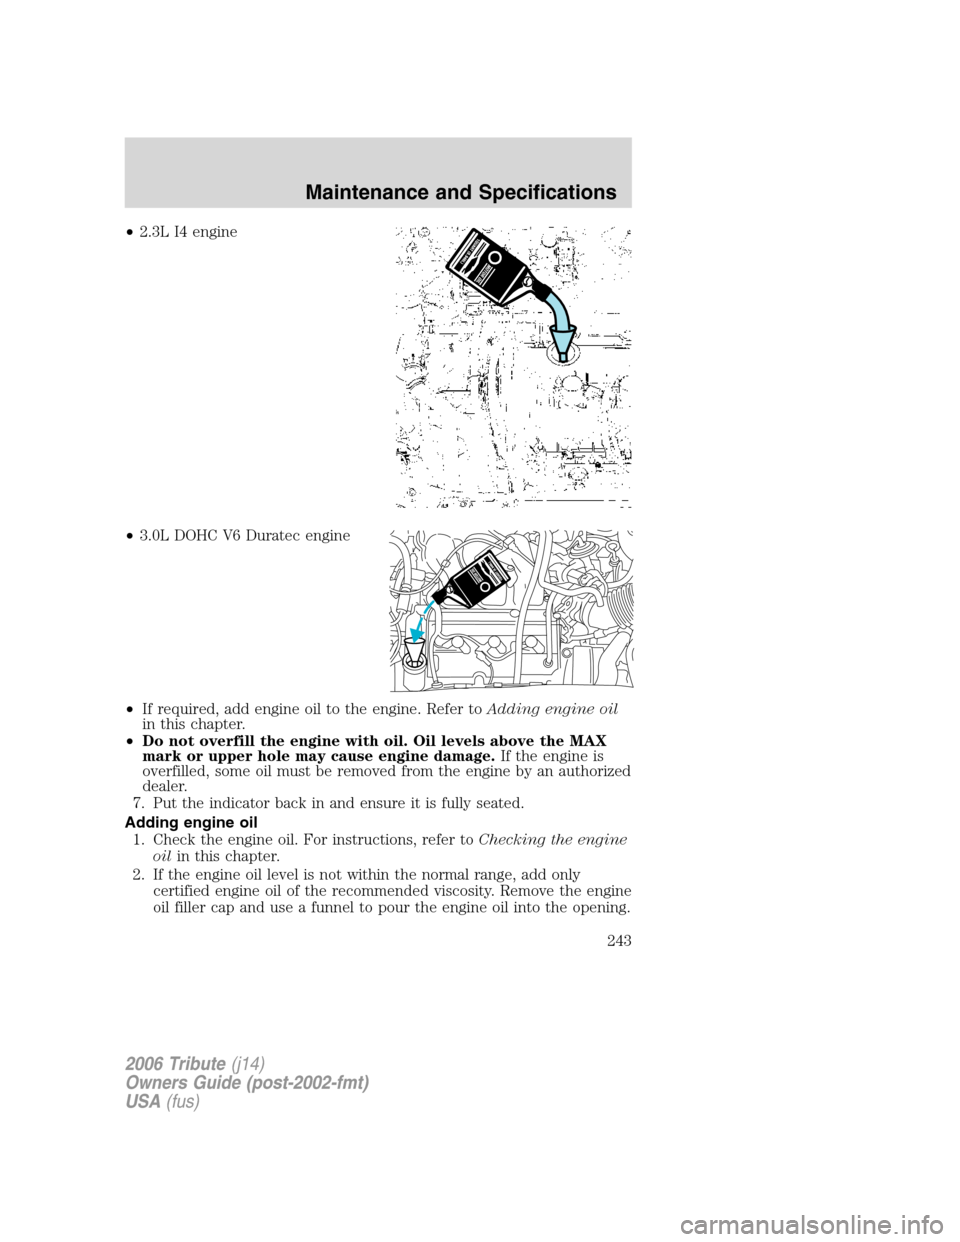 MAZDA MODEL TRIBUTE 2006  Owners Manual (in English) •2.3L I4 engine
•3.0L DOHC V6 Duratec engine
•If required, add engine oil to the engine. Refer toAdding engine oil
in this chapter.
•Do not overfill the engine with oil. Oil levels above the M